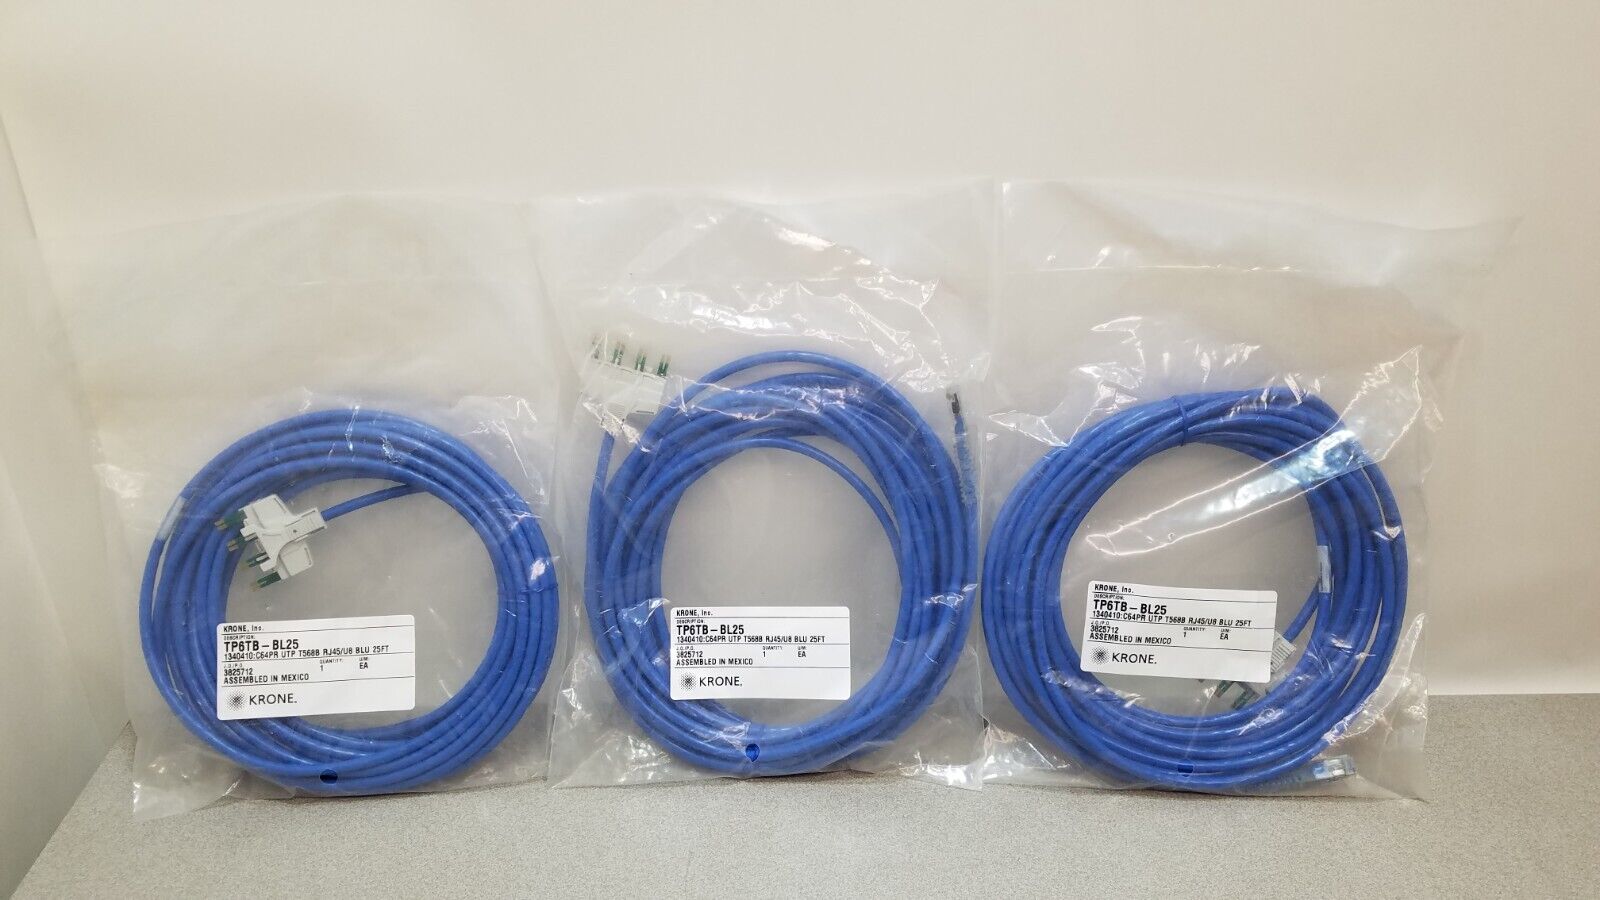 Lot of 3 Krone TP6TB-BL25 Ultim8 Copper Patch Cord, 4-pair to RJ45, Cat 6, 25ft